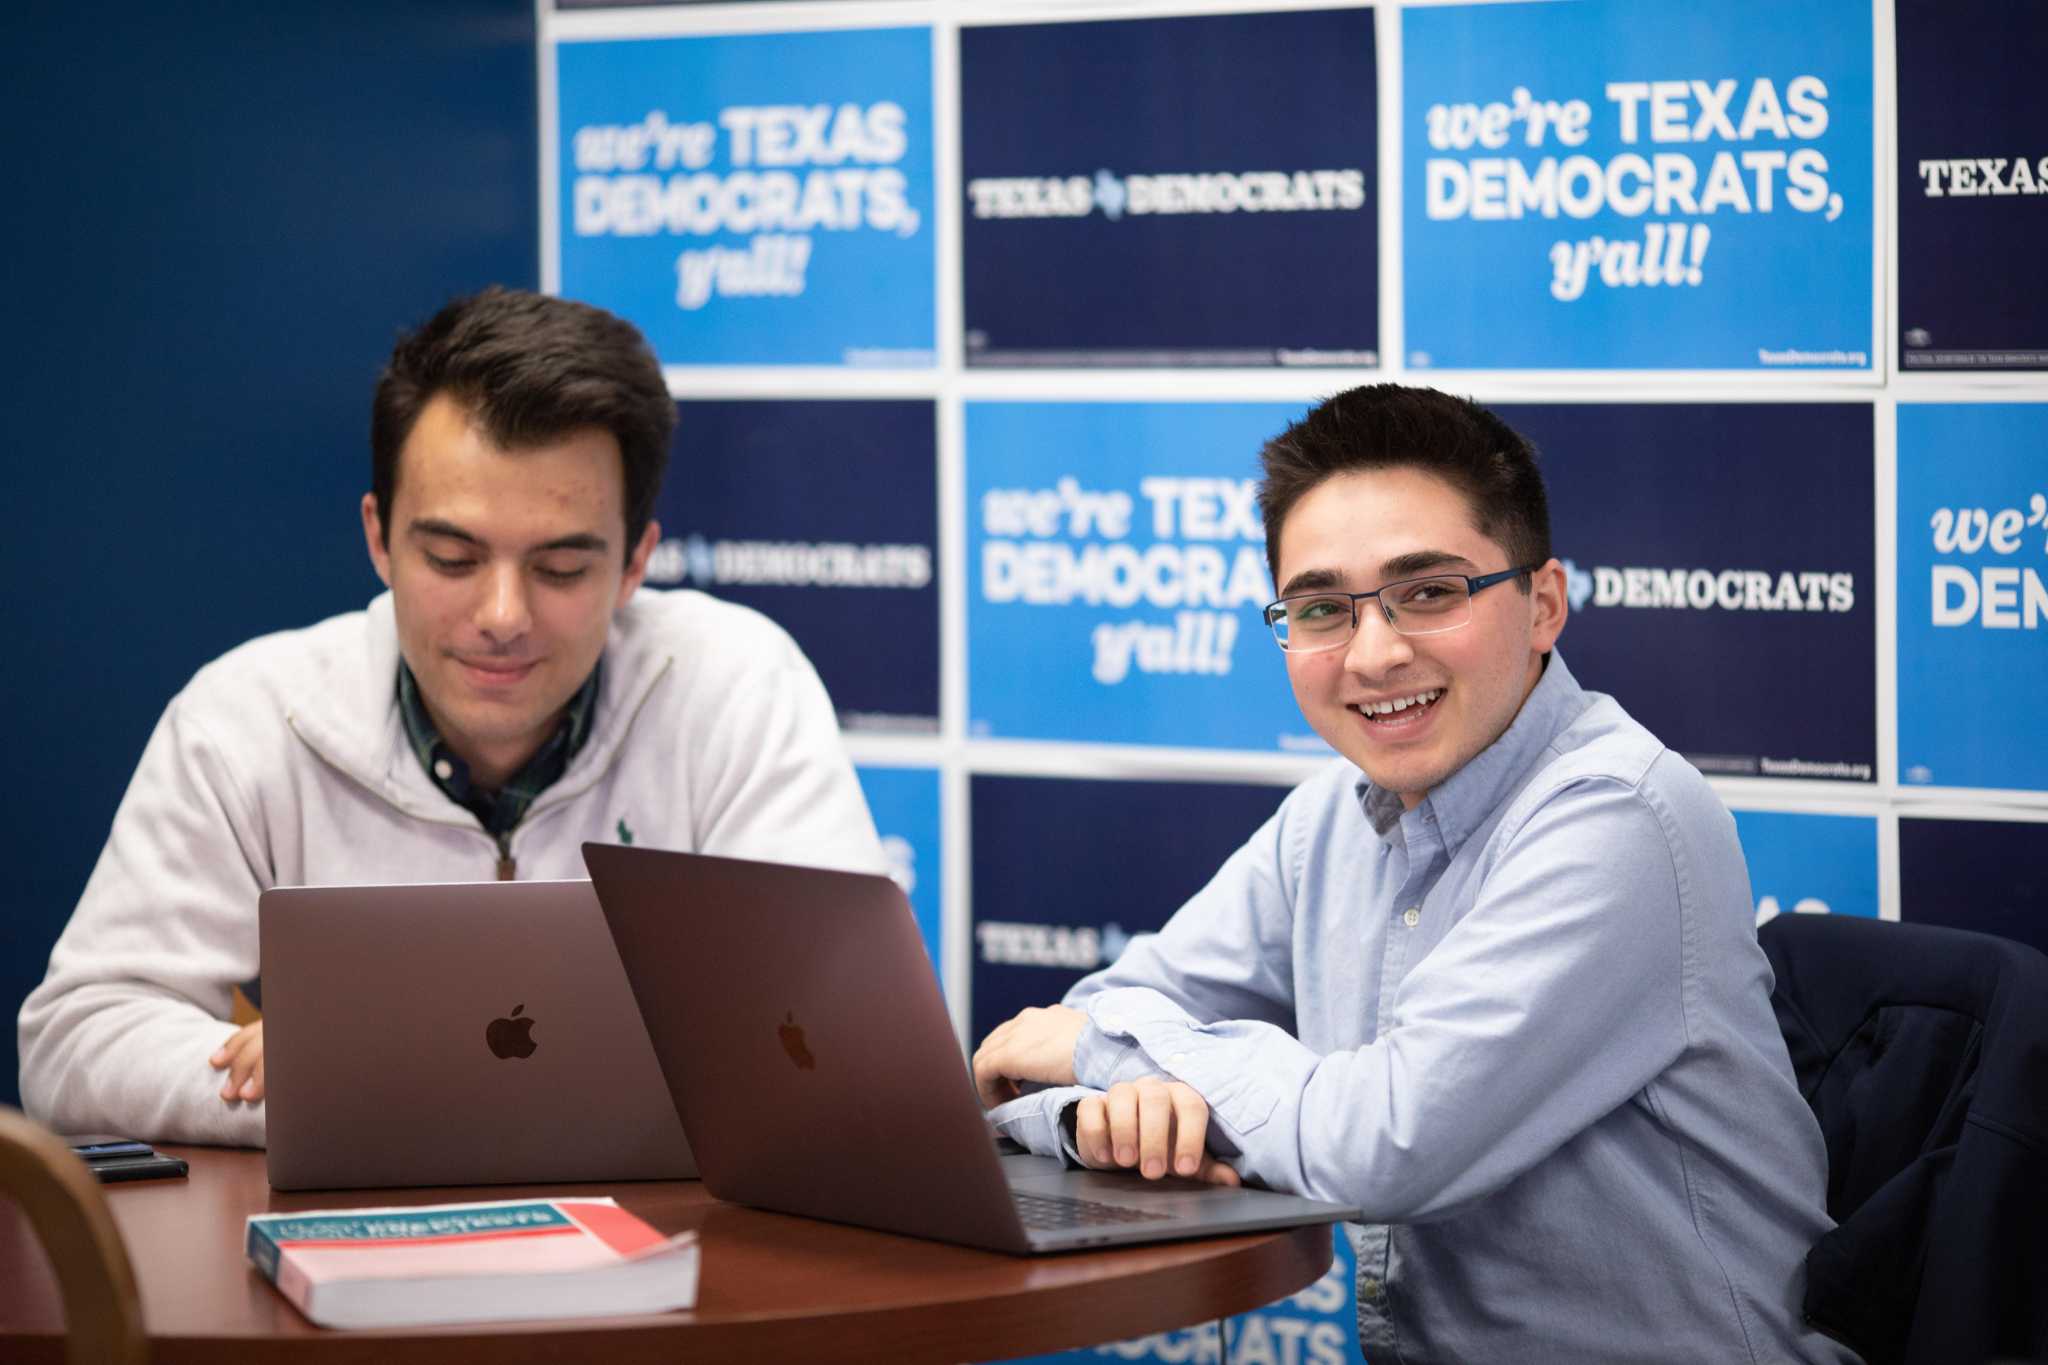 Young Dem staffers in Texas make moves after midterm gains